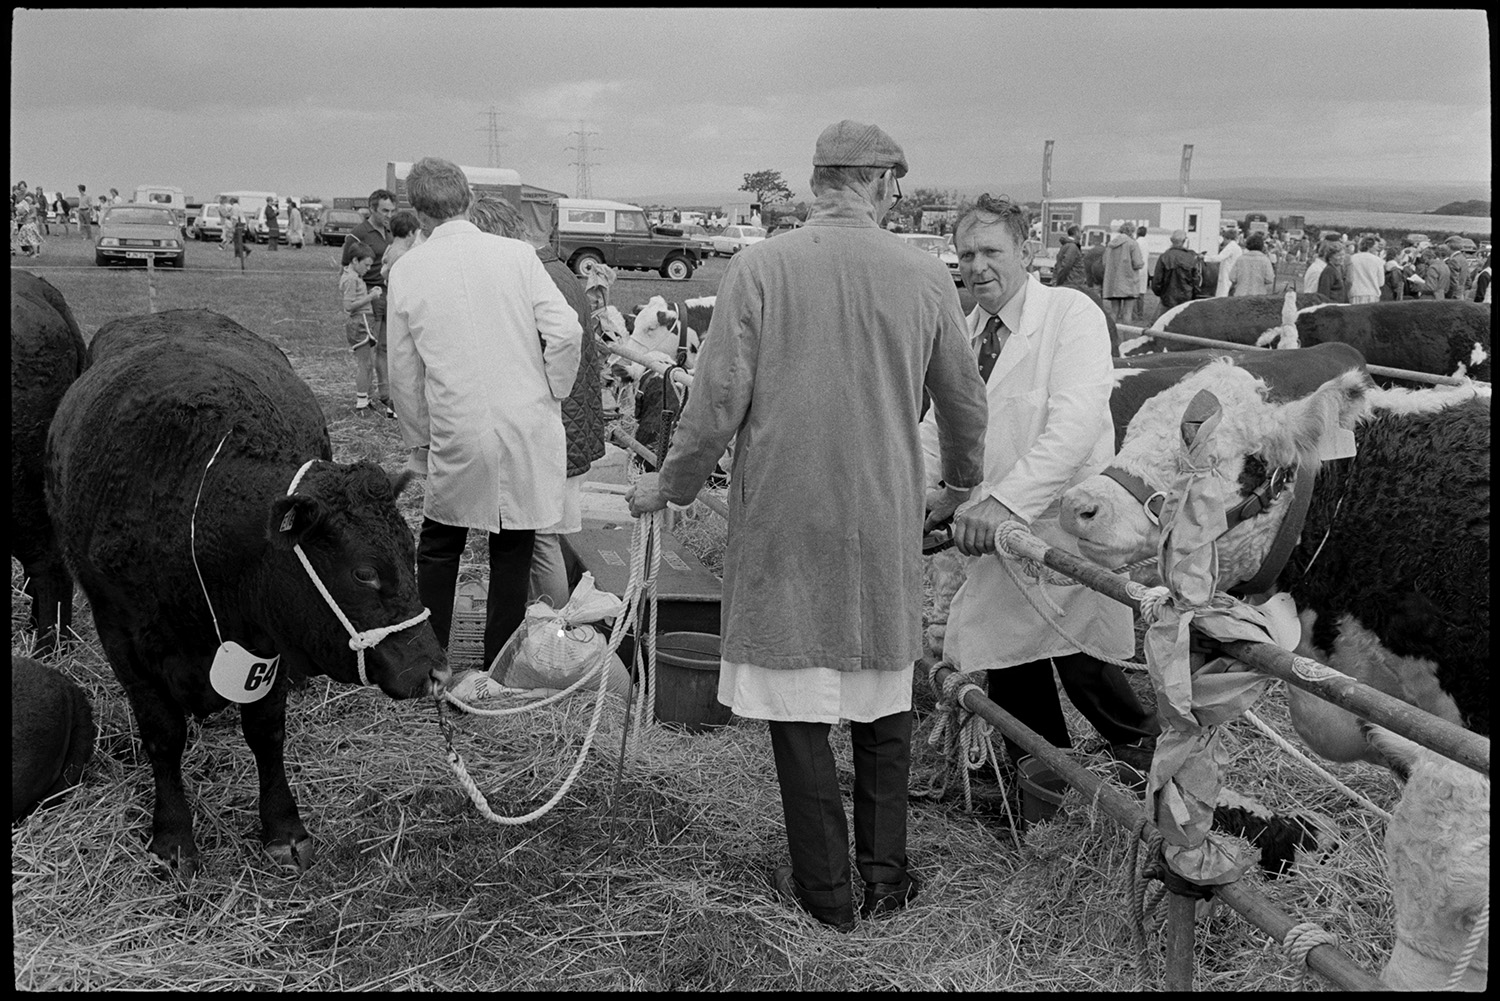 North Devon Show, Prize cattle, sheep, exhibitions etc
[Men with prize beef cattle at the North Devon Show, near Alverdiscott.  Visitors and vehicles are visible in the background.]